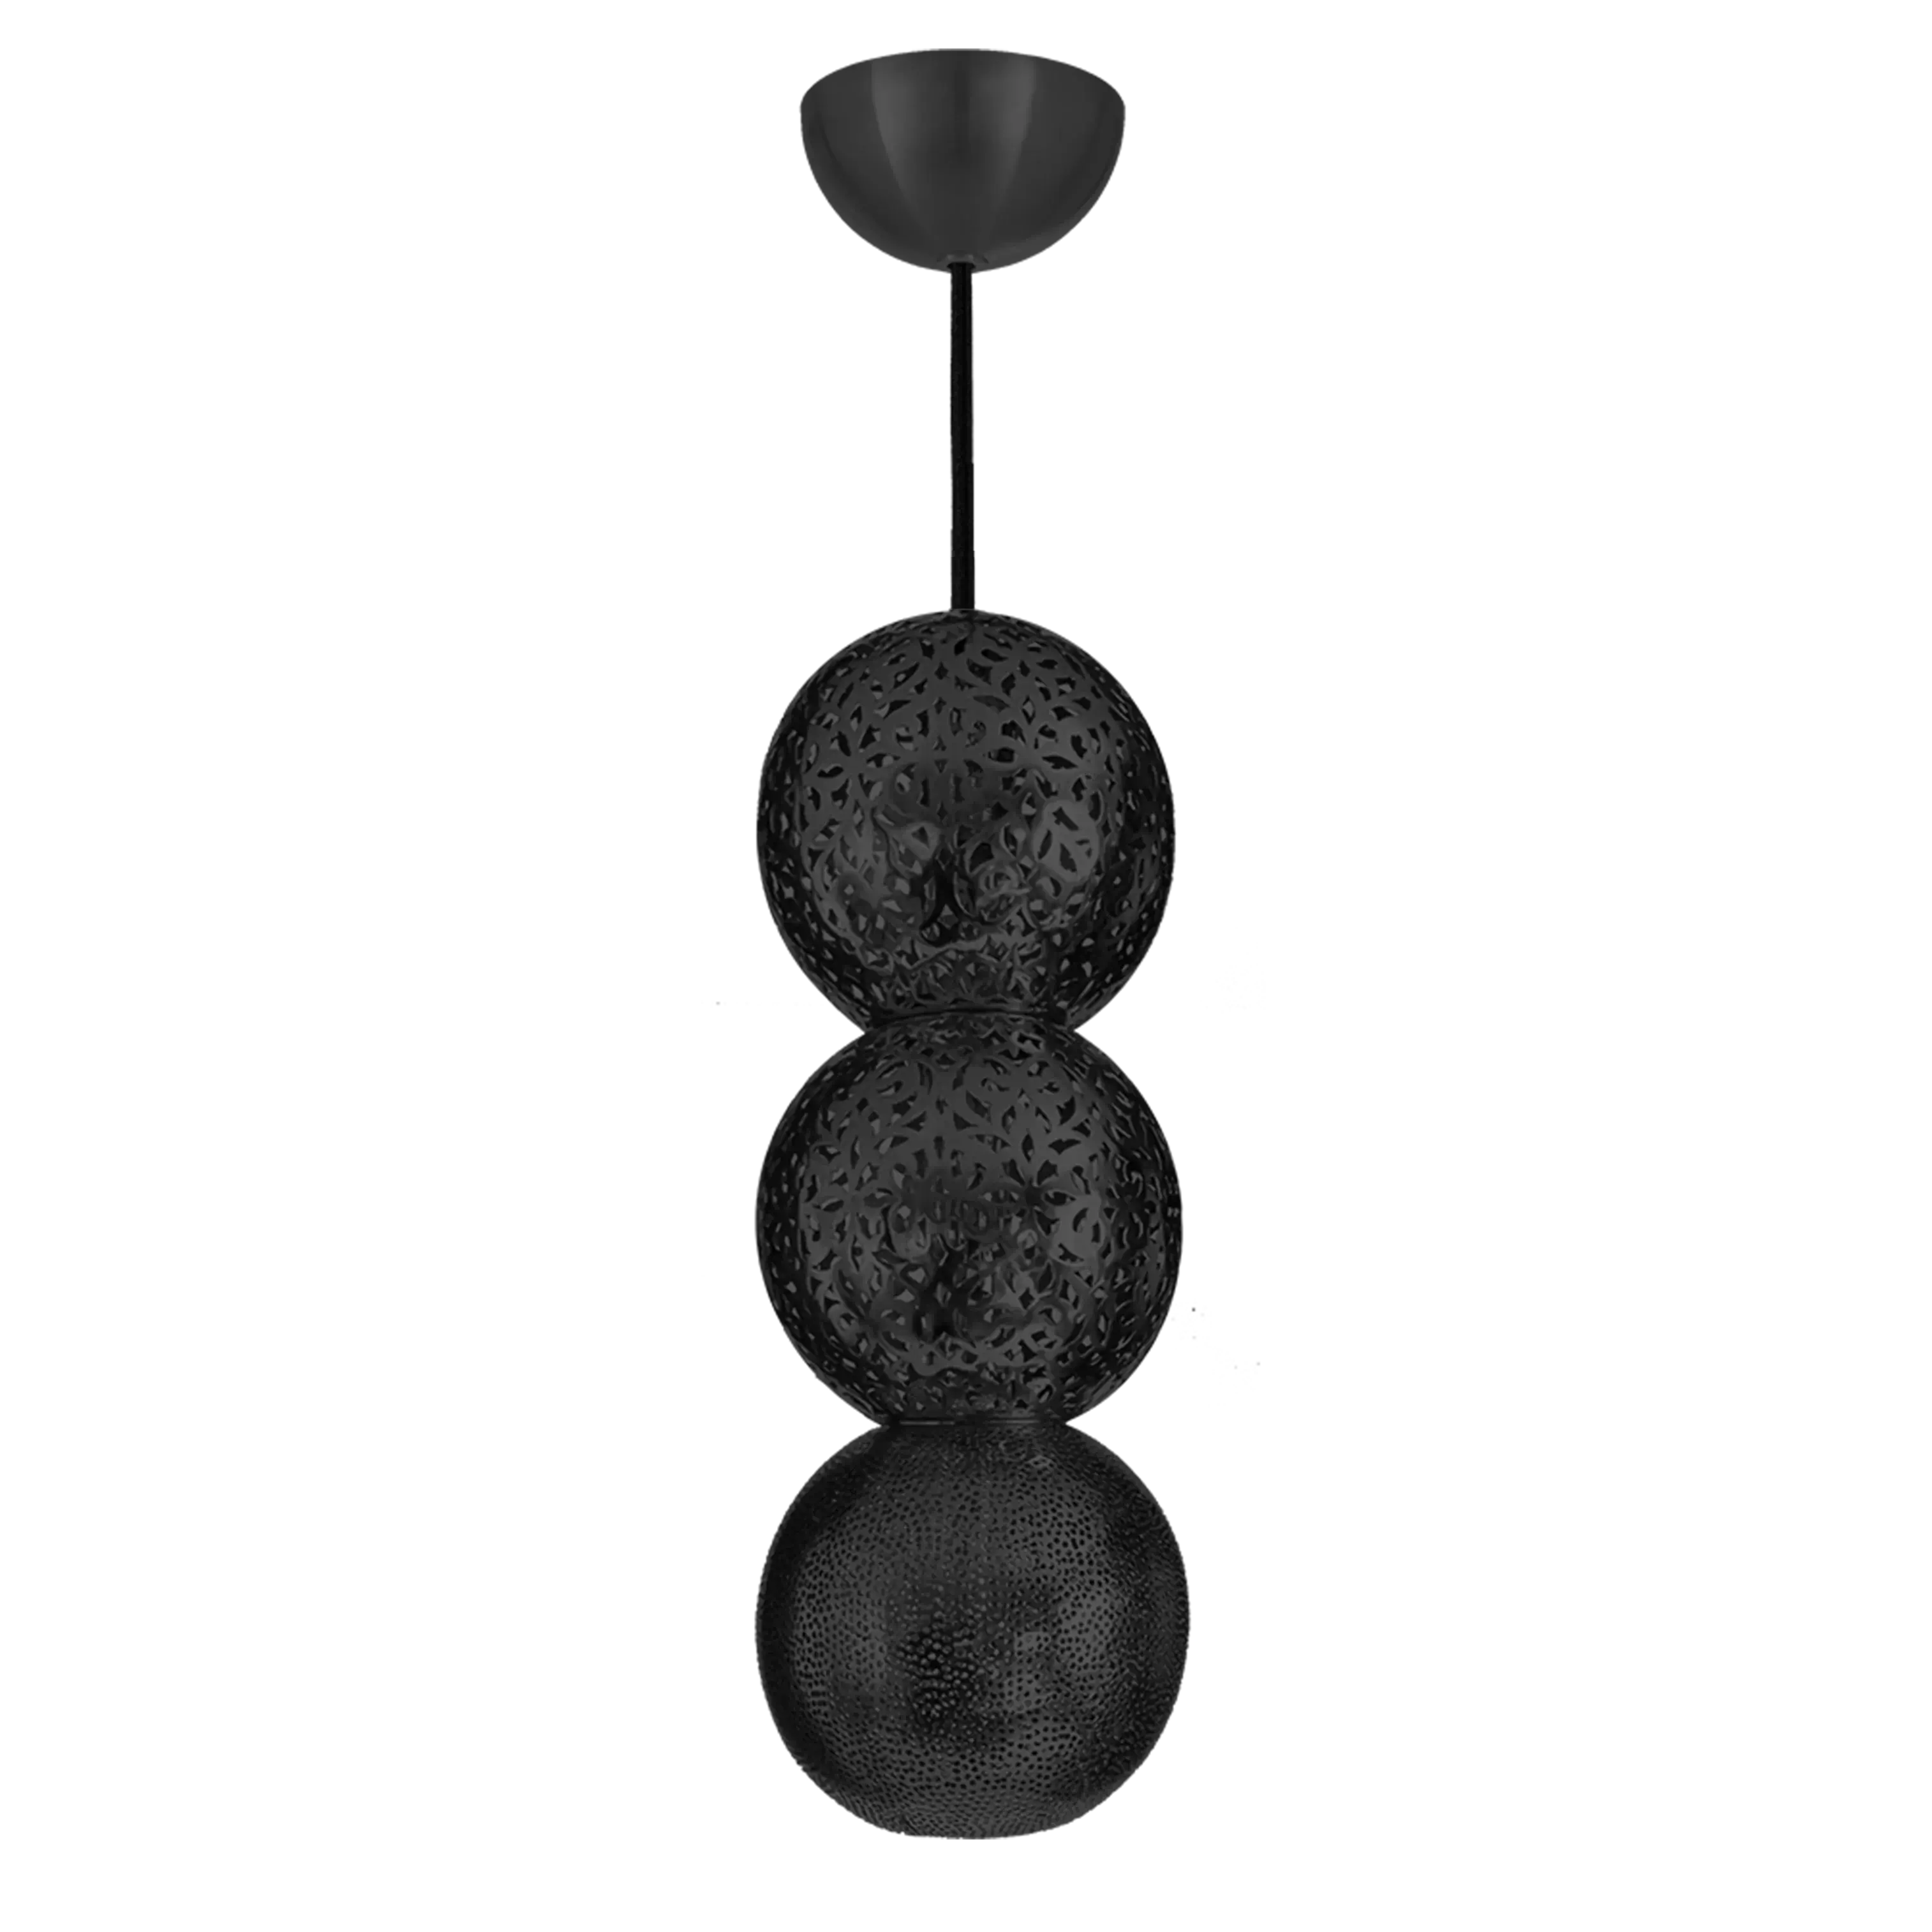 Dounia home Pendant light in black  made of Metal, Model: Riad